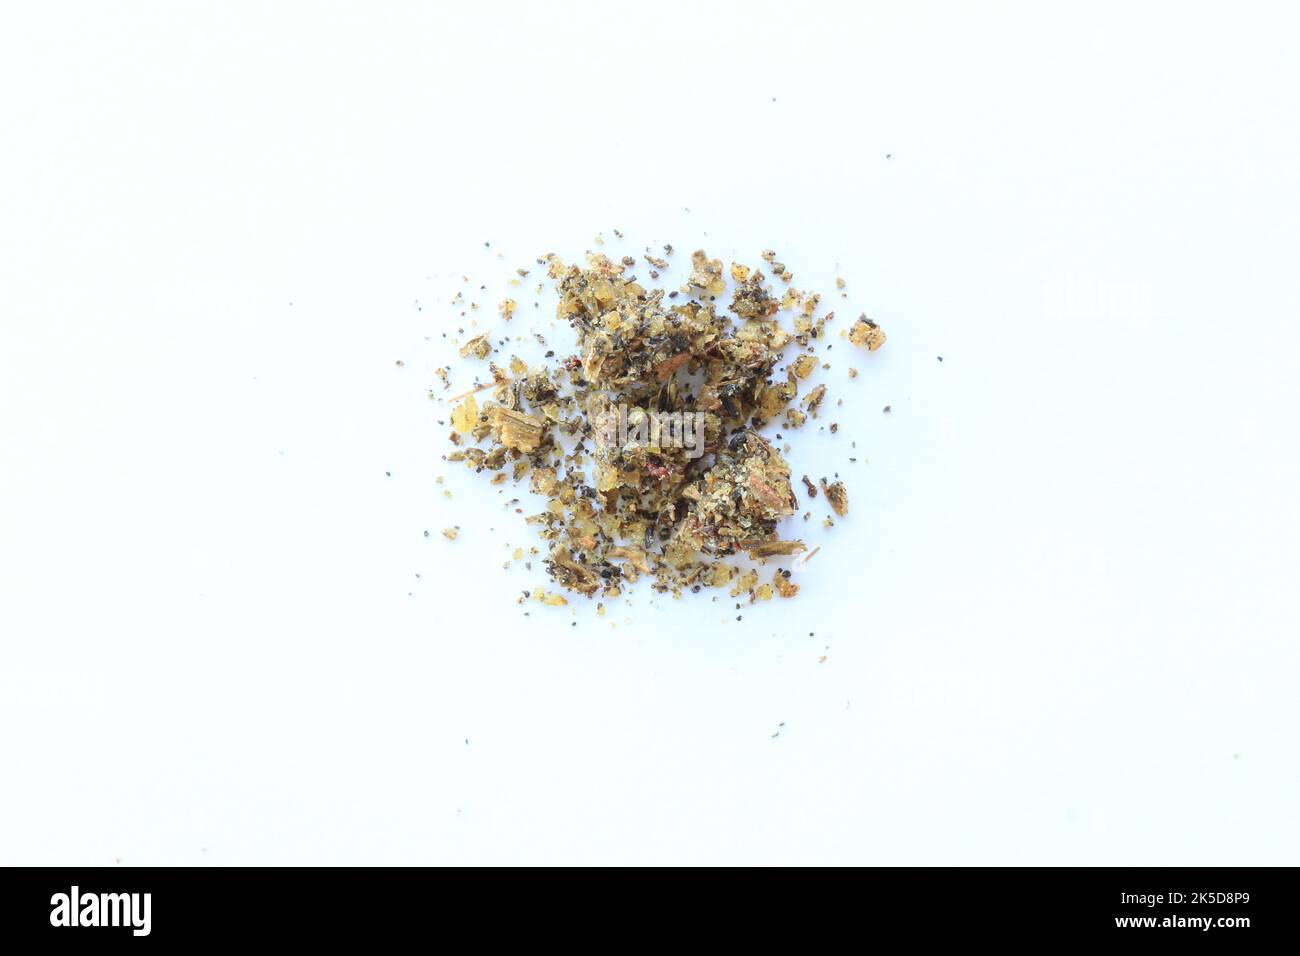 Natural aromatic incense Patchouli resin isolated on a white background Stock Photo